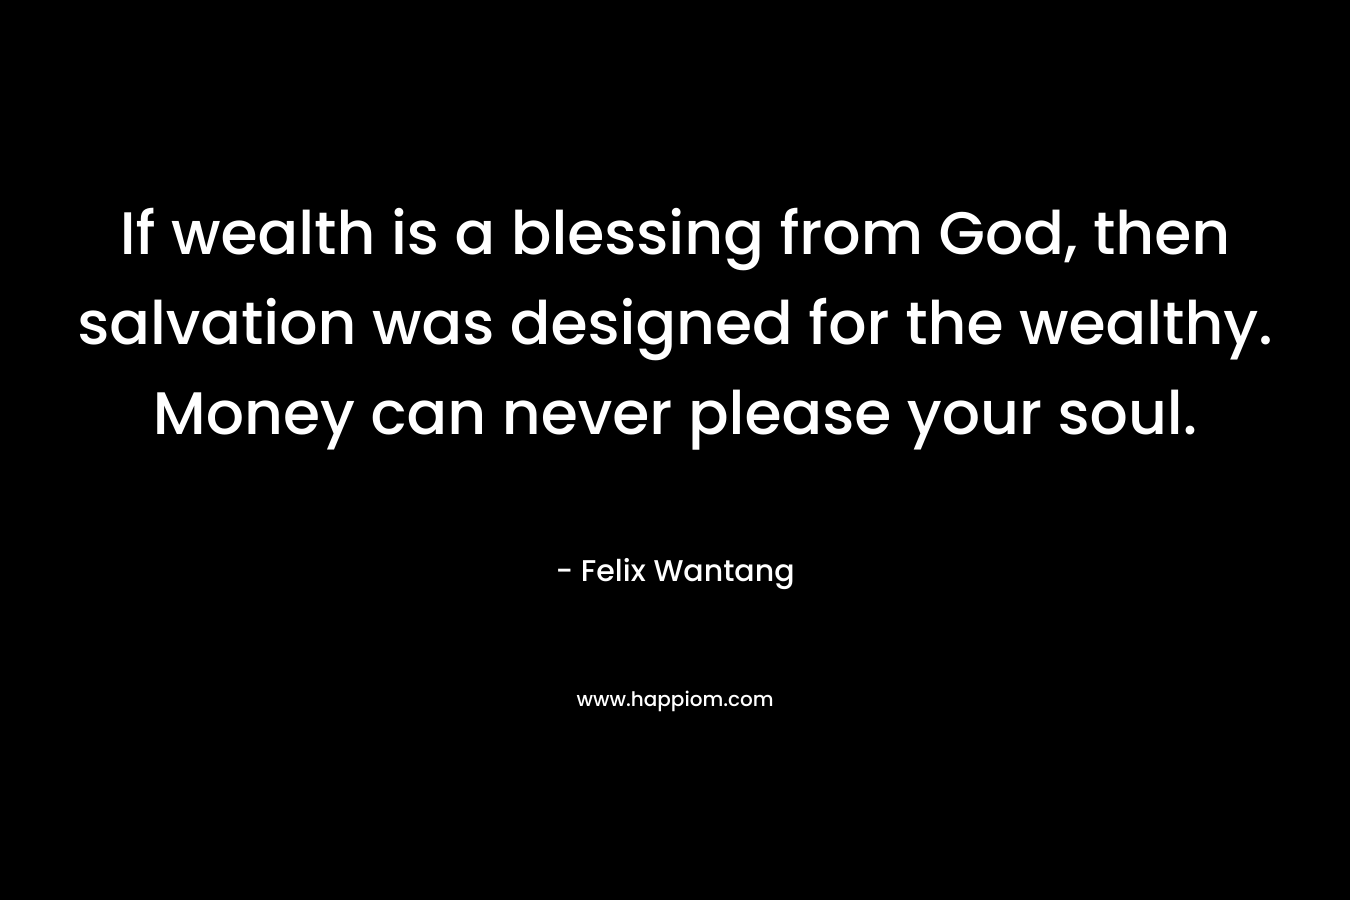 If wealth is a blessing from God, then salvation was designed for the wealthy. Money can never please your soul. – Felix Wantang